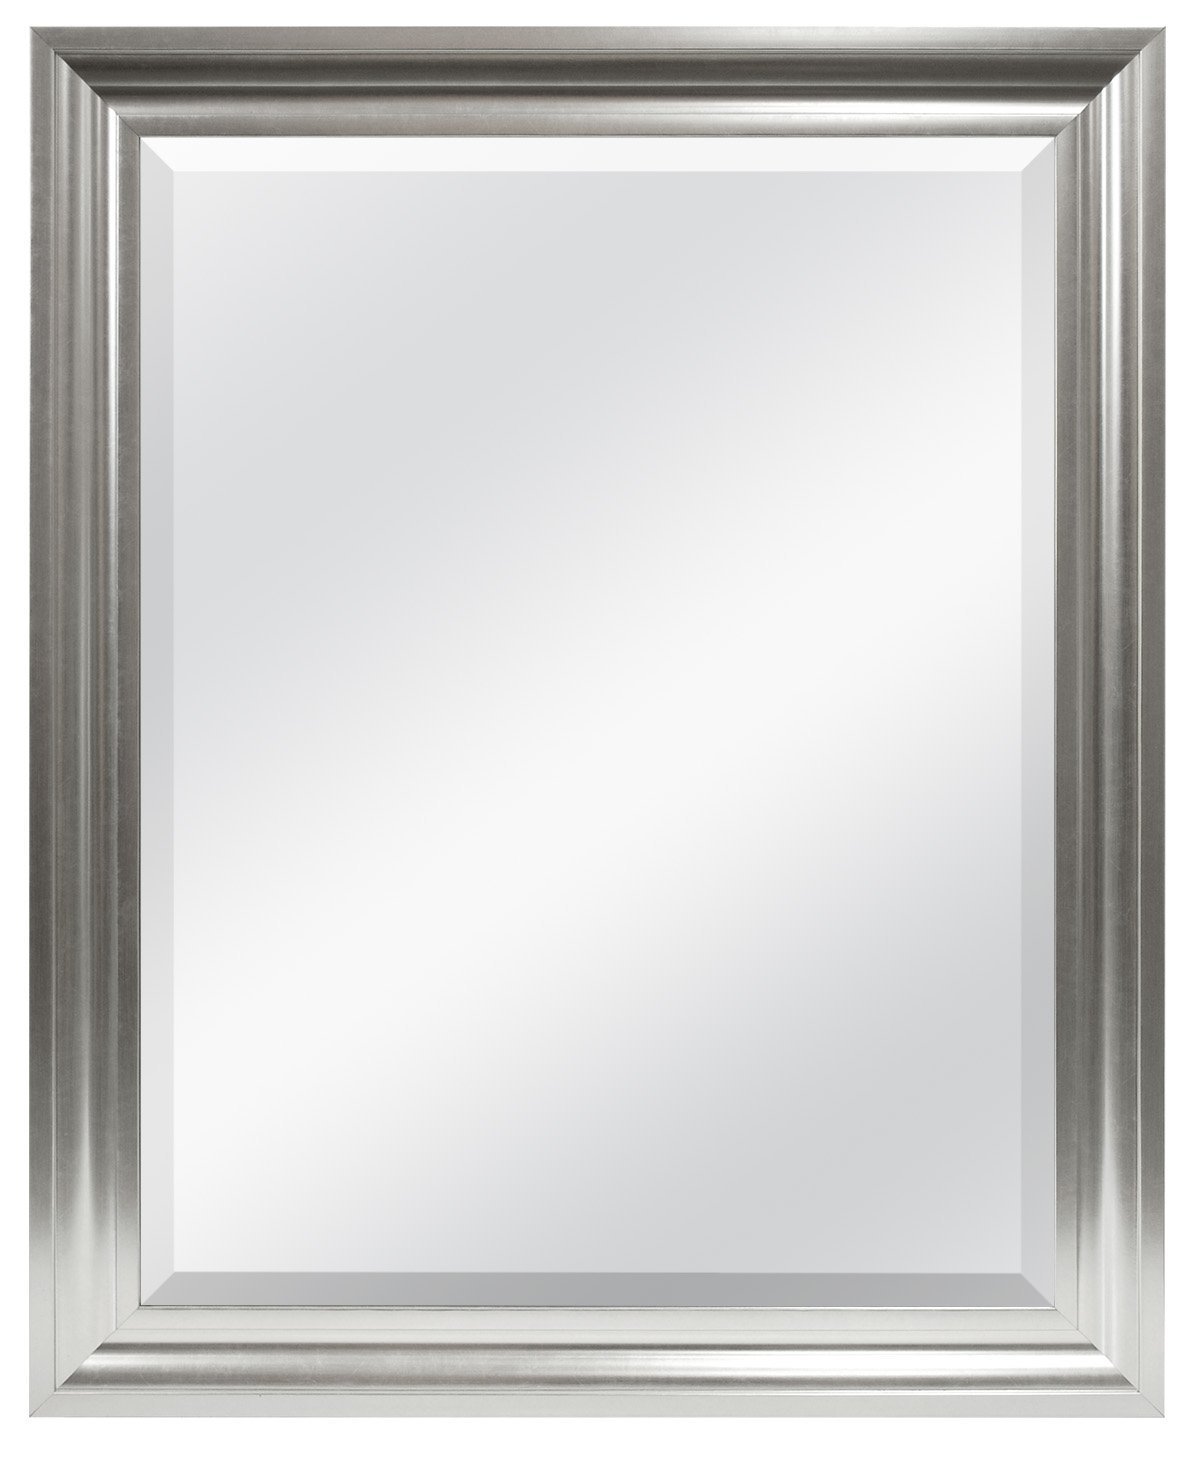 MCS 20675 21.75 by 27.5-Inch Beveled Mirror with 26.5 by 32.5-Inch Frame, Satin Silver